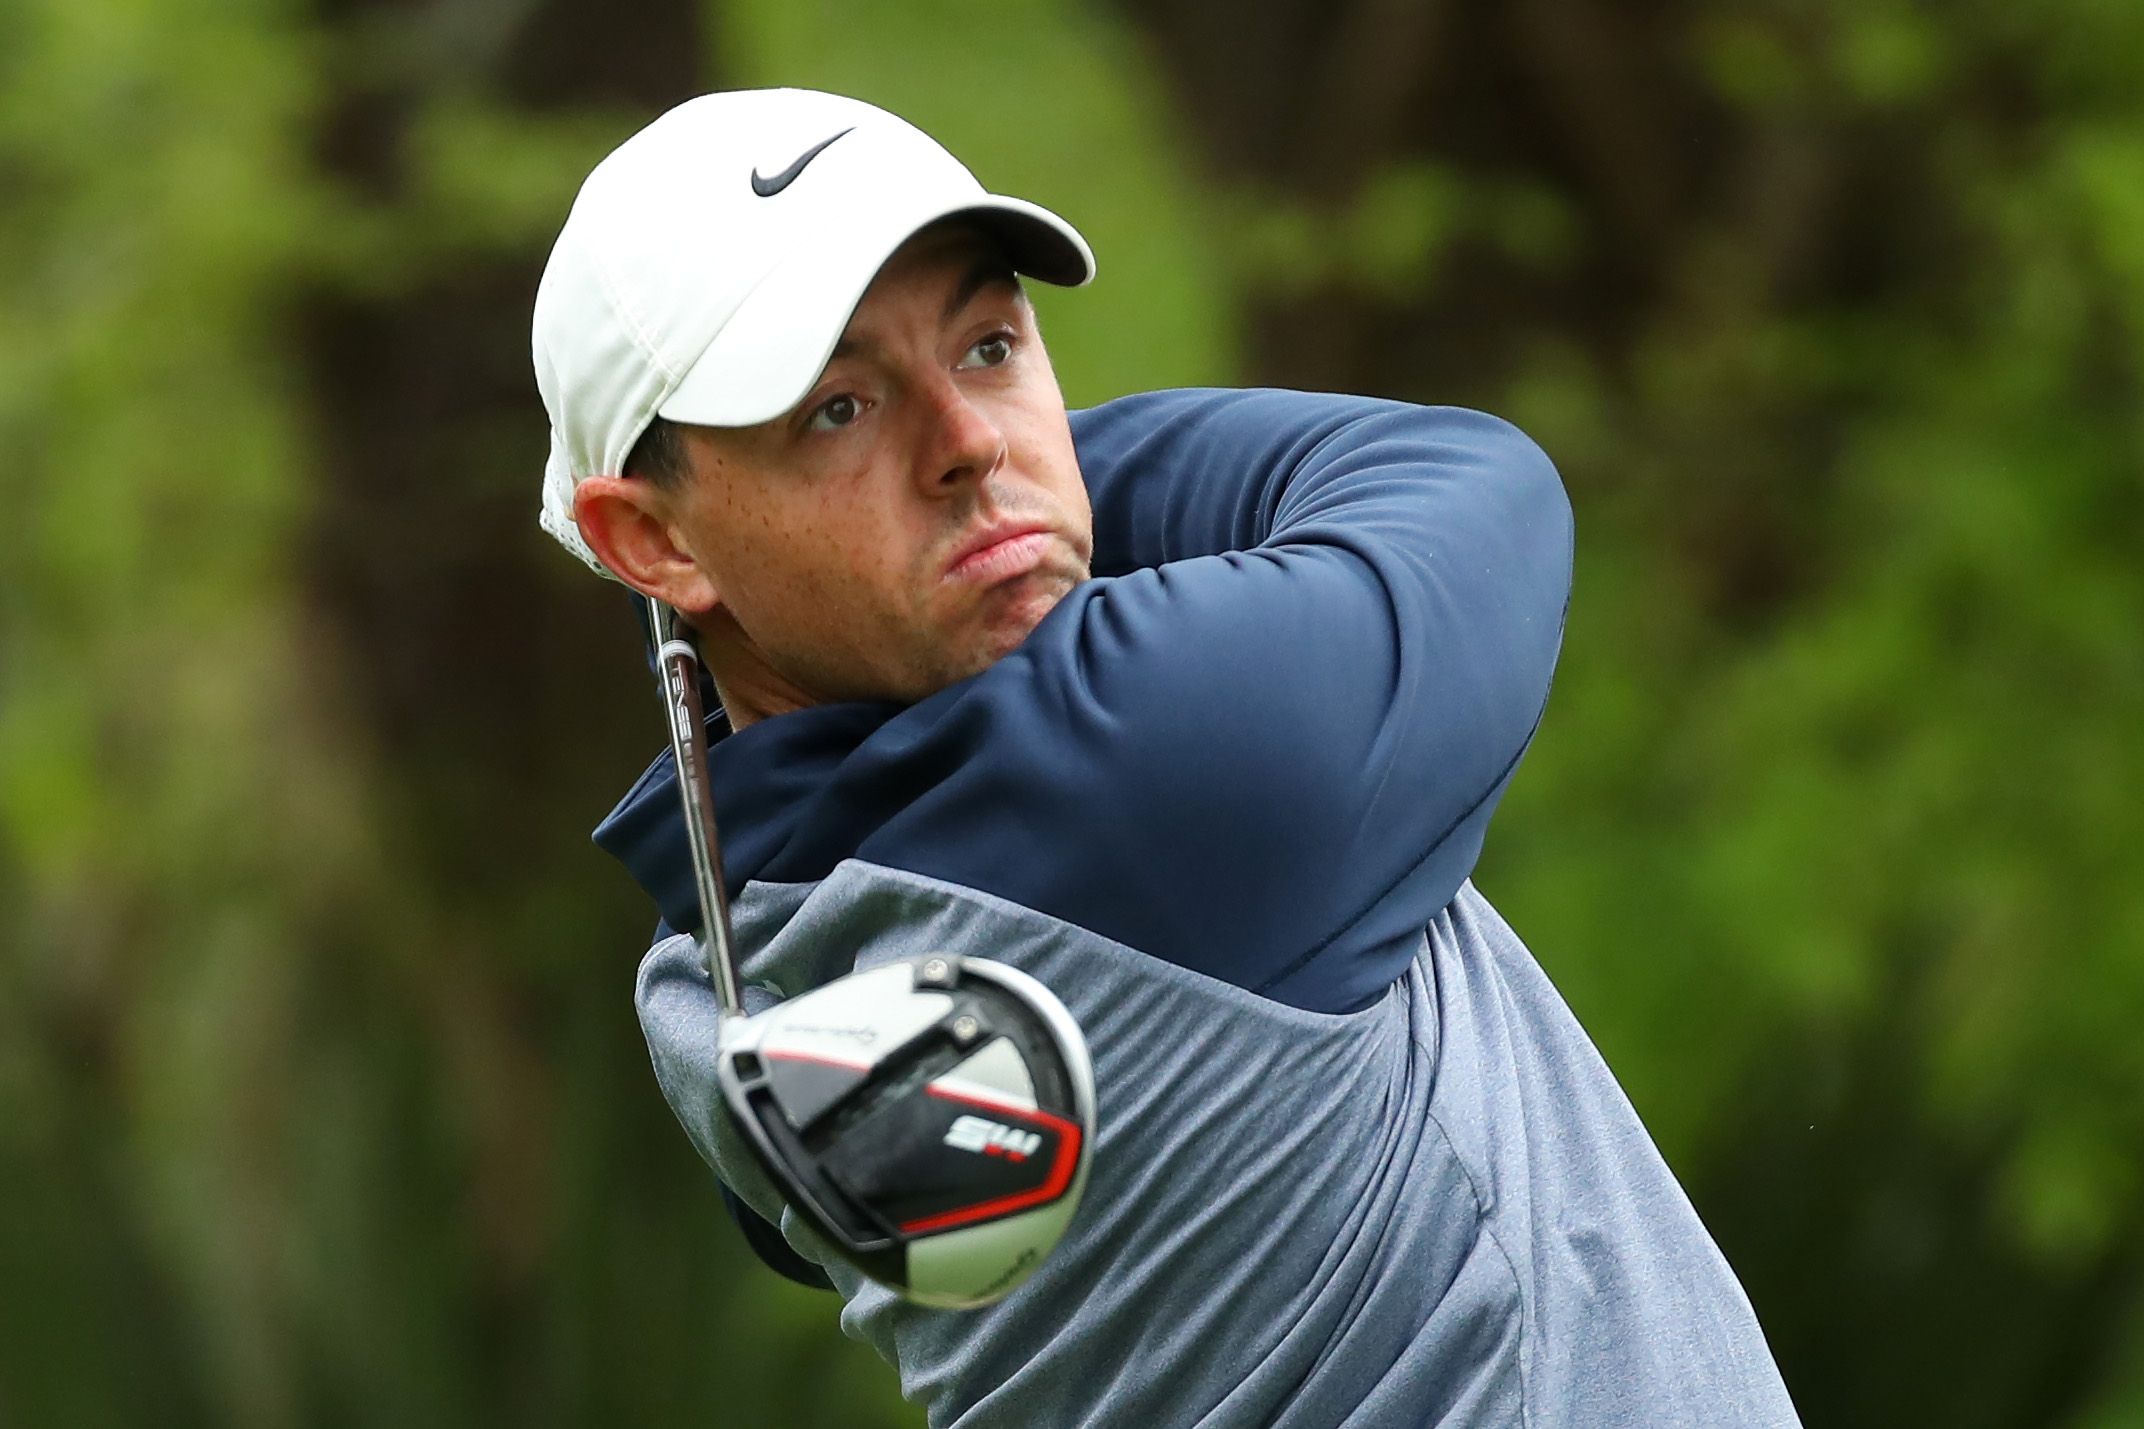 Rory McIlroy wins The Players, says I'm playing my best golf ever